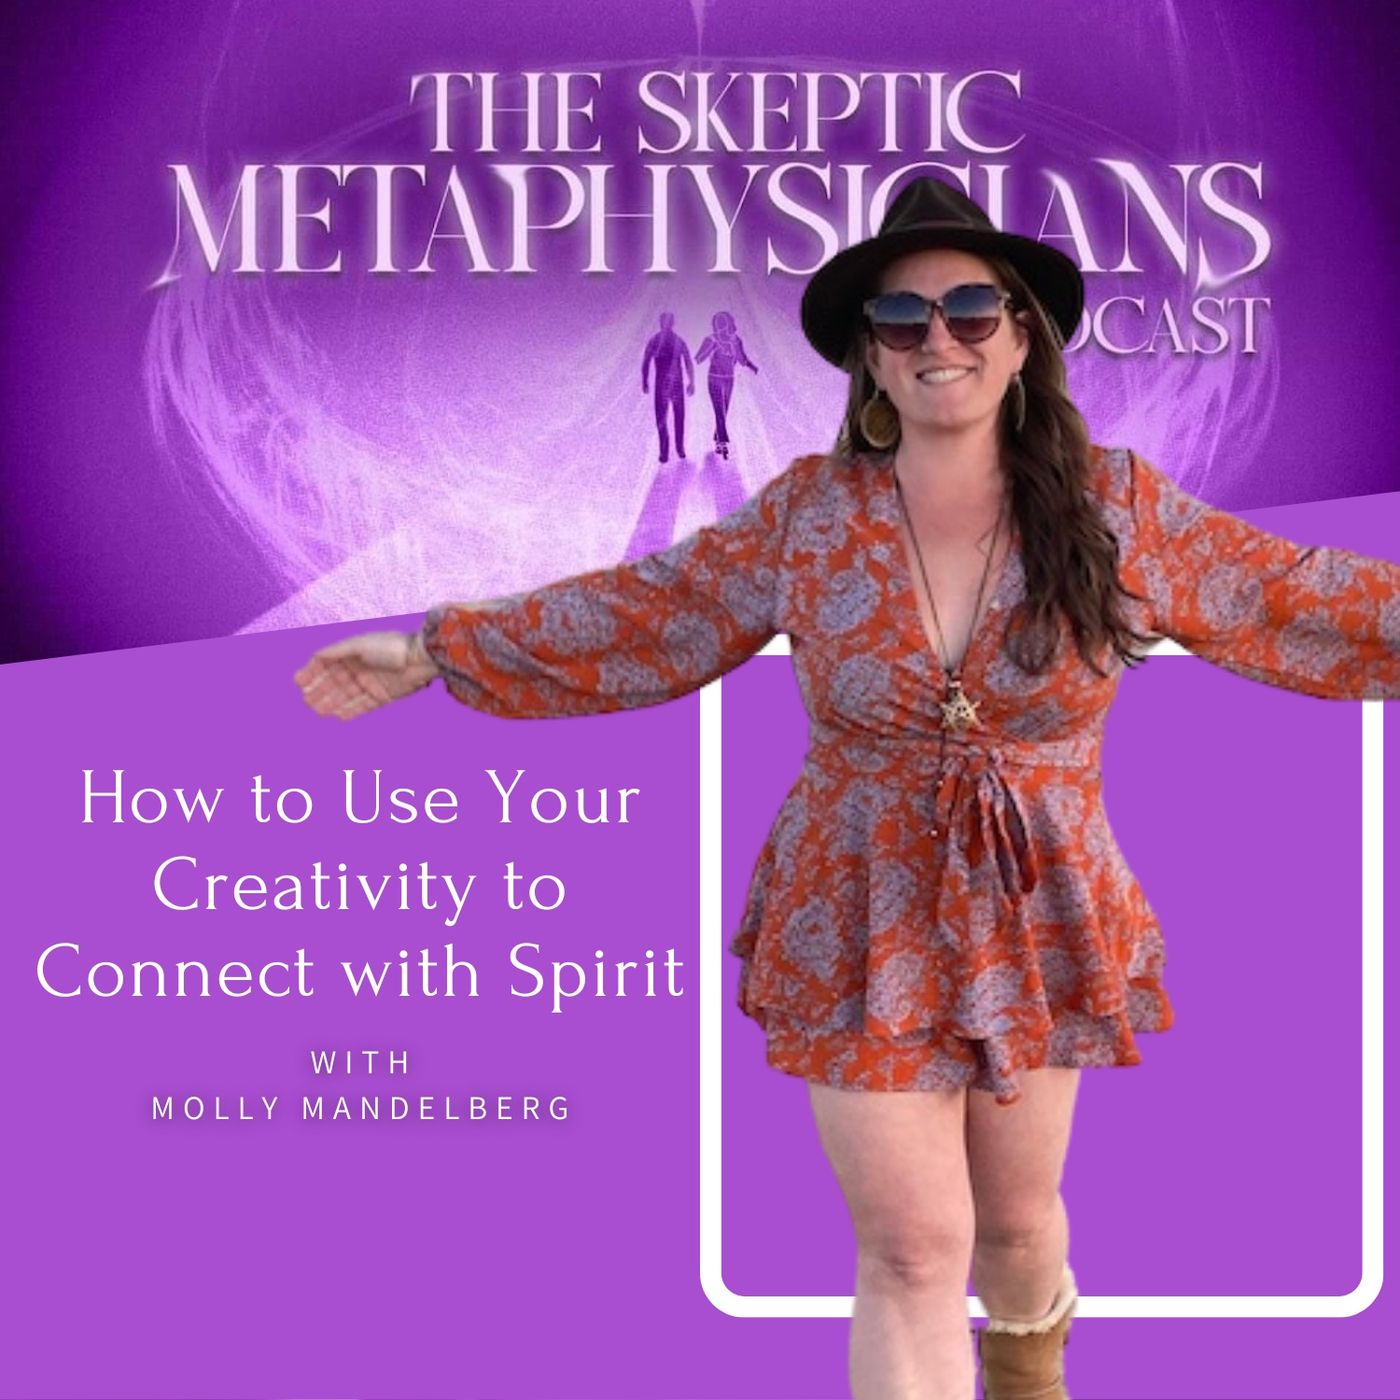 How to Use Your Creativity to Connect with Spirit